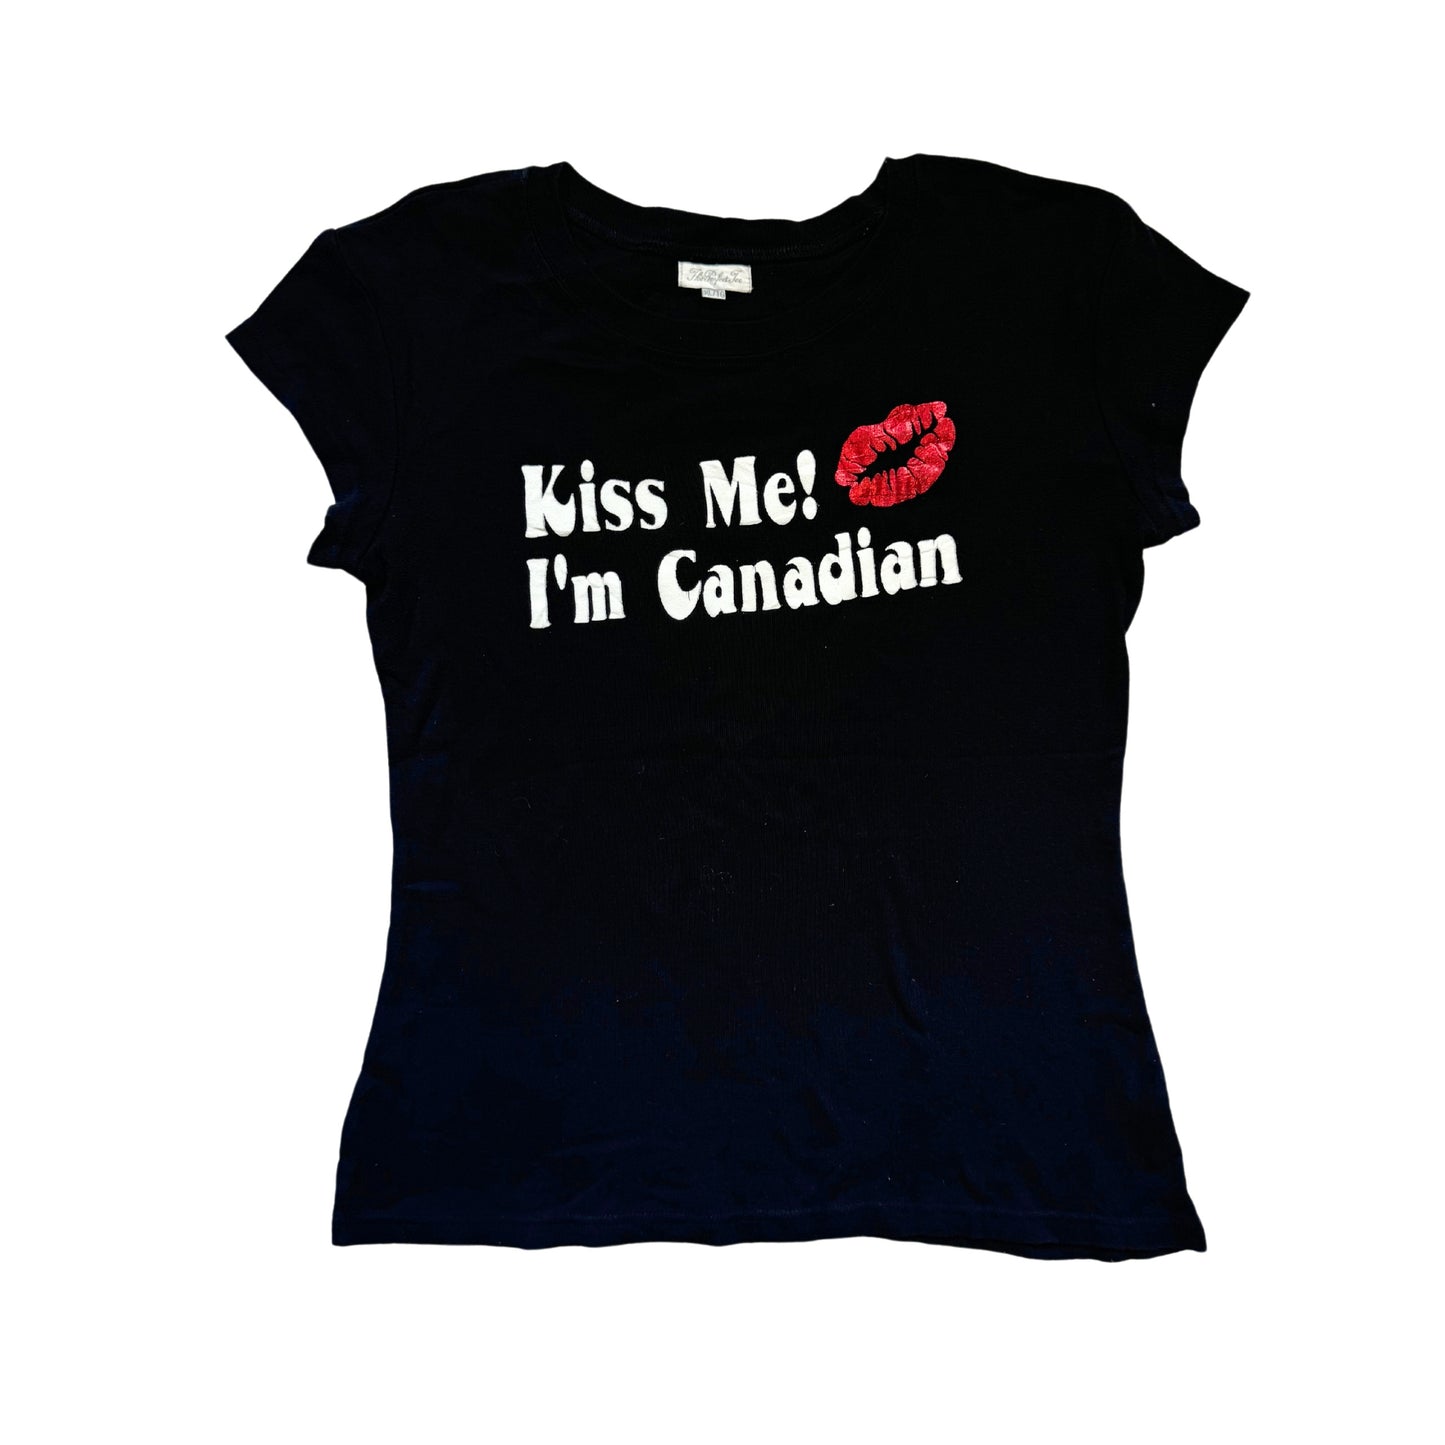 Vintage 2000s Y2k The Perfect Tee Kiss Me I’m Canadian Graphic Tee